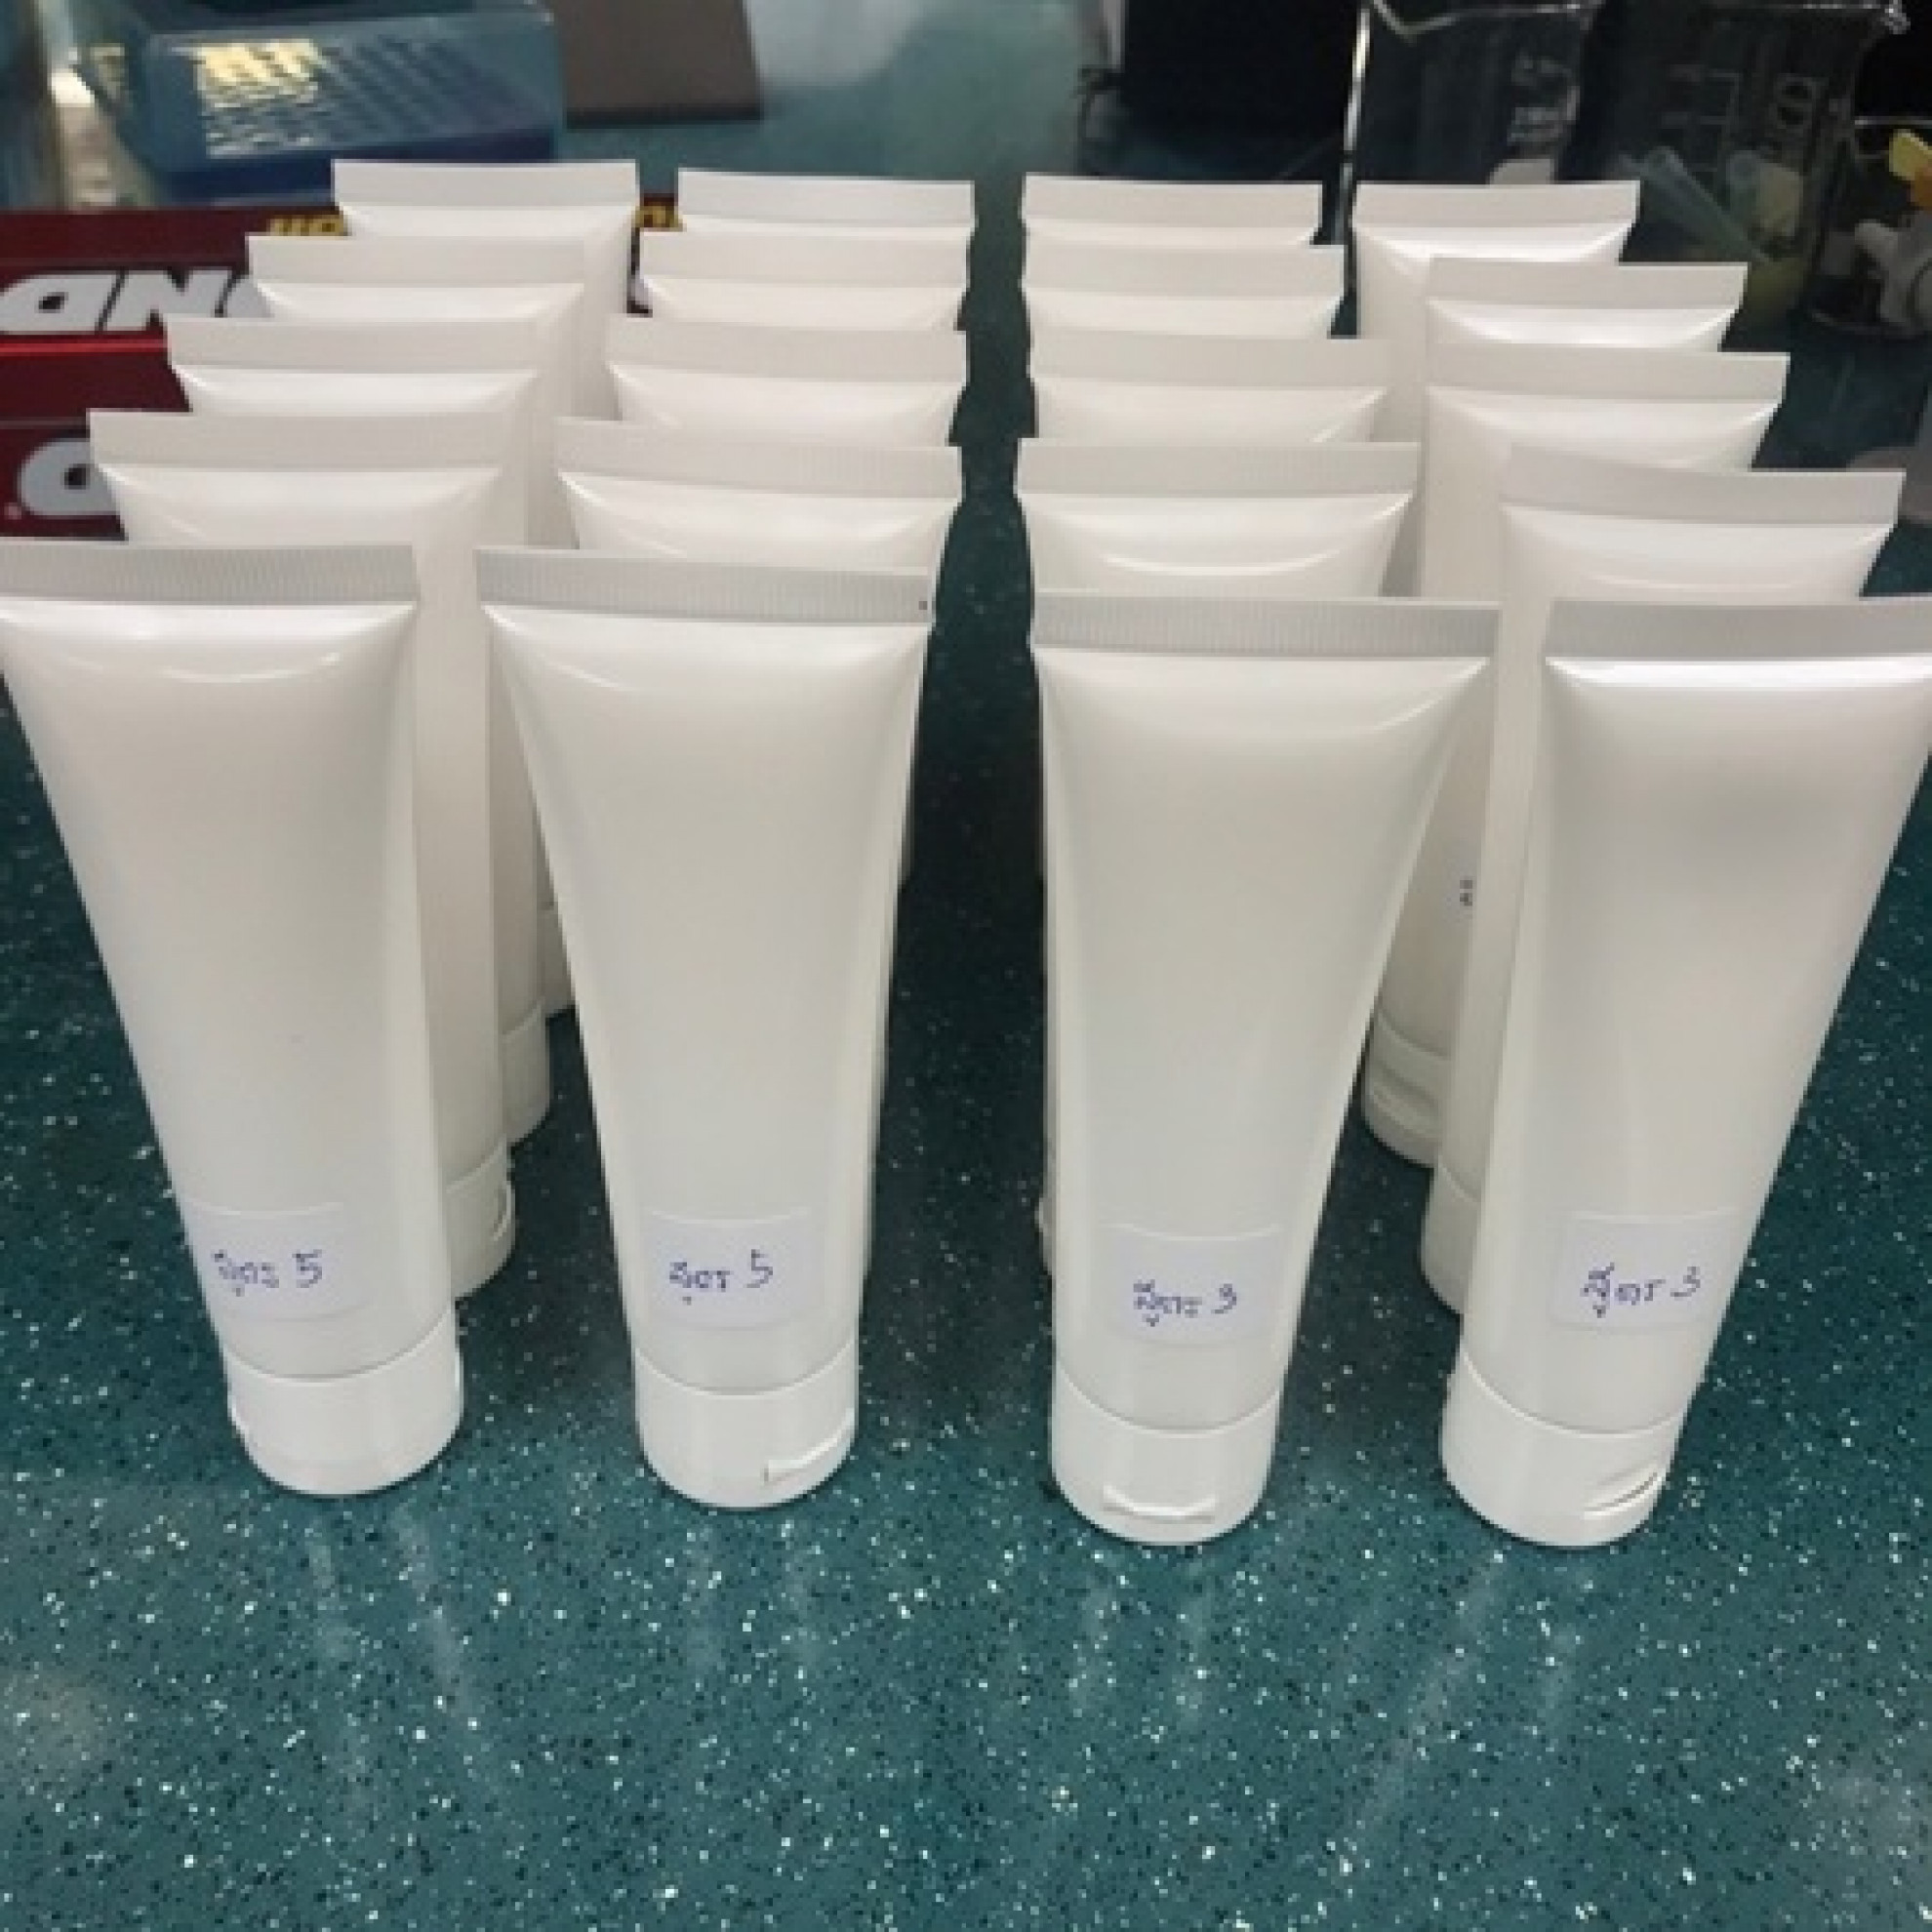 Developing hand cream by varying 10 odors with 2 concentrations in each odor.